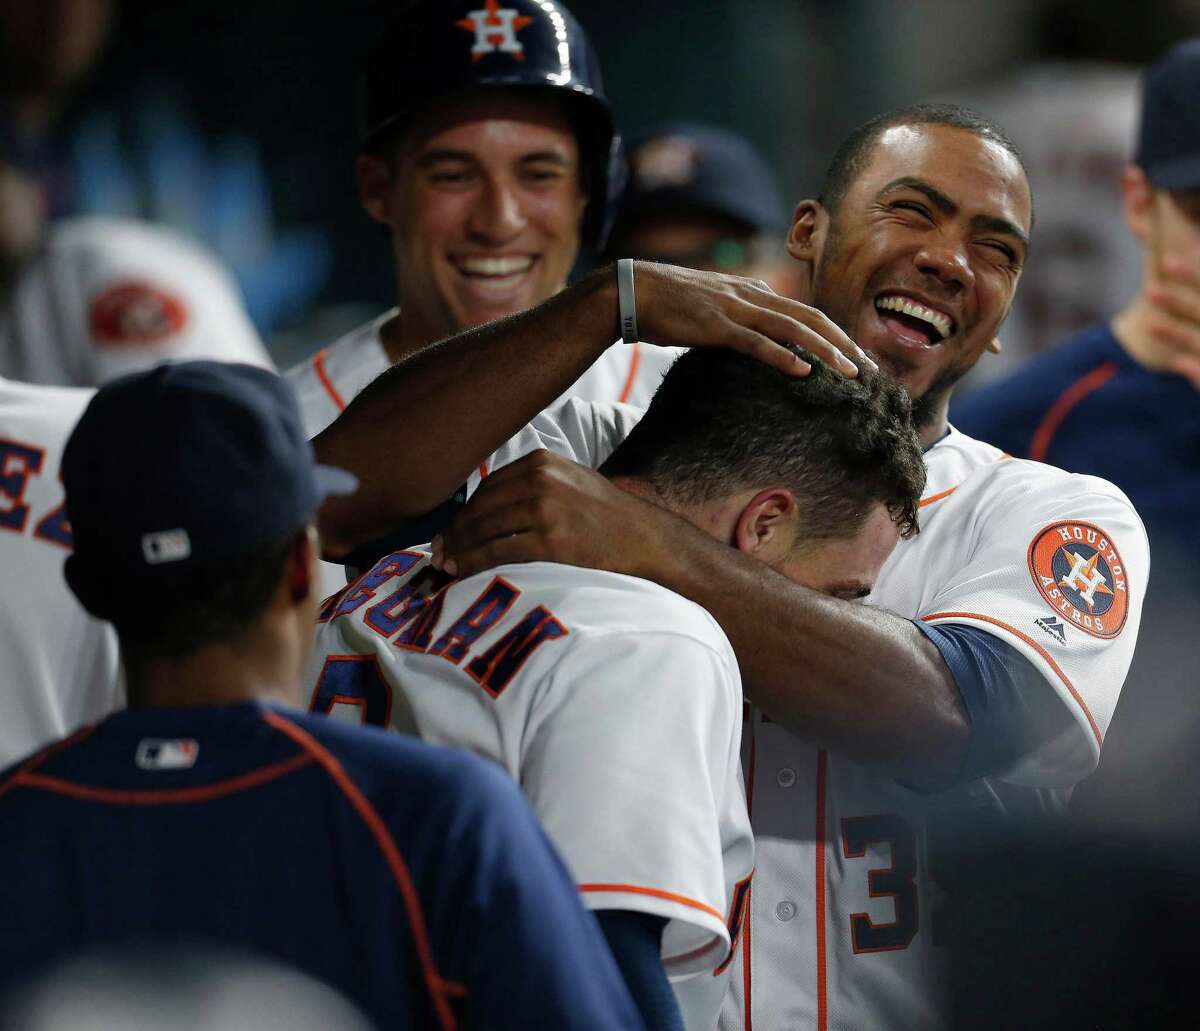 Houston Astros third baseman Alex Bregman (2) celebrates with Teoscar Hernandez (35) after hitting his first major league home run during the first inning of an MLB game at Minute Maid Park,Tuesday, Aug. 16, 2016, in Houston.